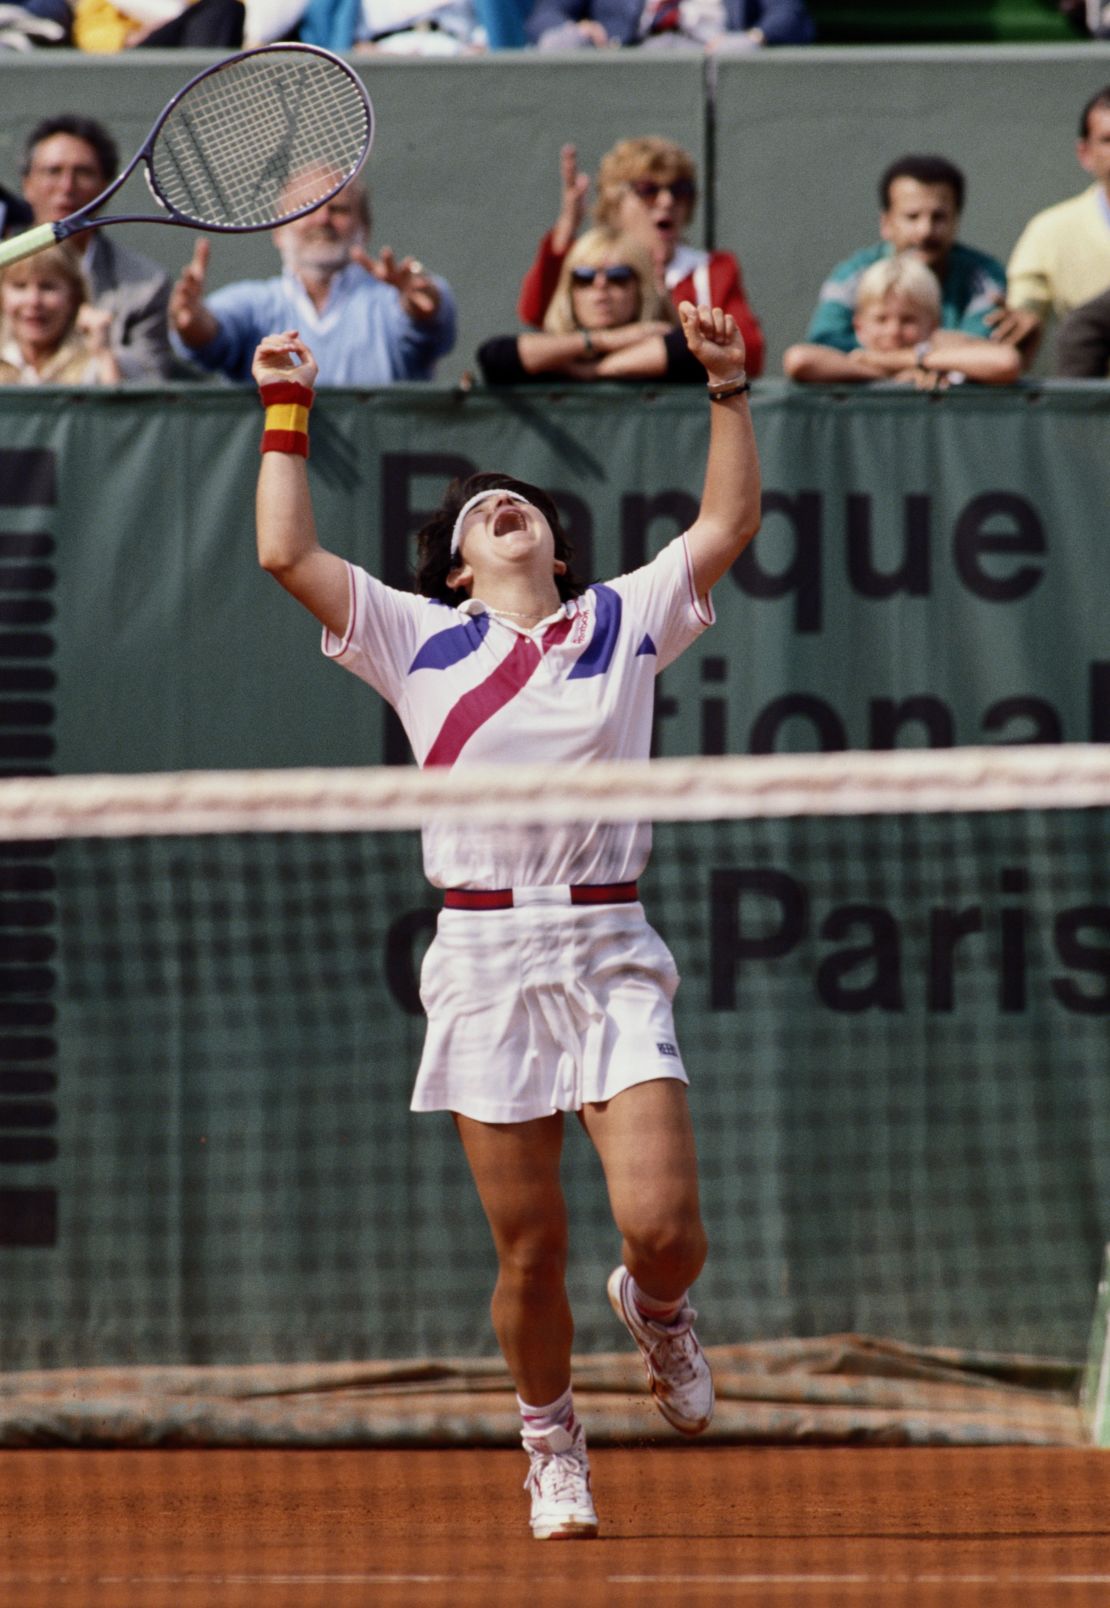 Sanchez Vicario throws her racquet into the air after winning  the Women's French Open  in 1989.